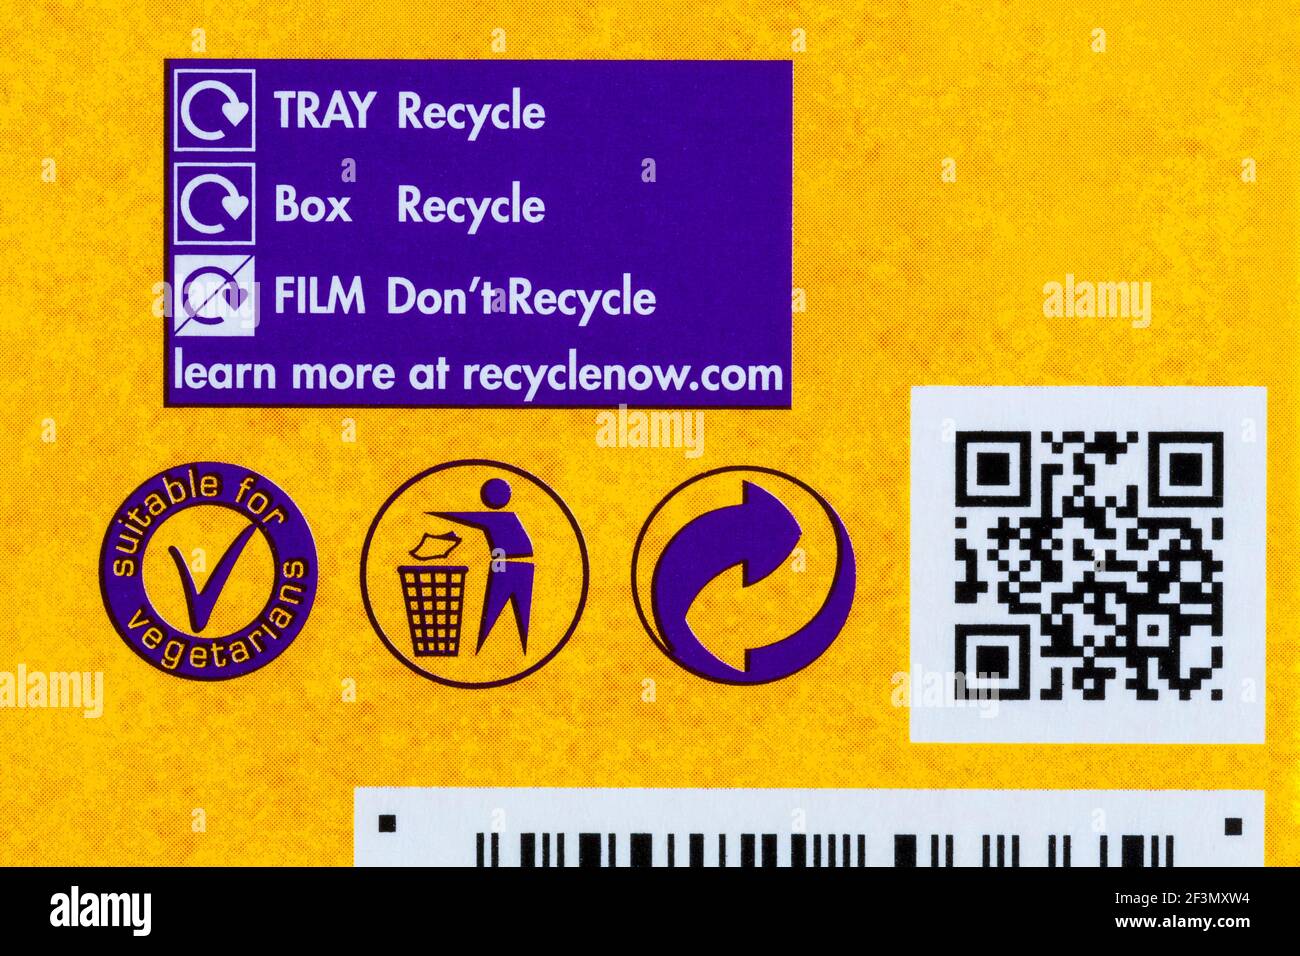 Recycling information and suitable for vegetarians symbol on box of Cadbury Mini Eggs Nest Cakes - disposal recycling recycle logo symbol Stock Photo